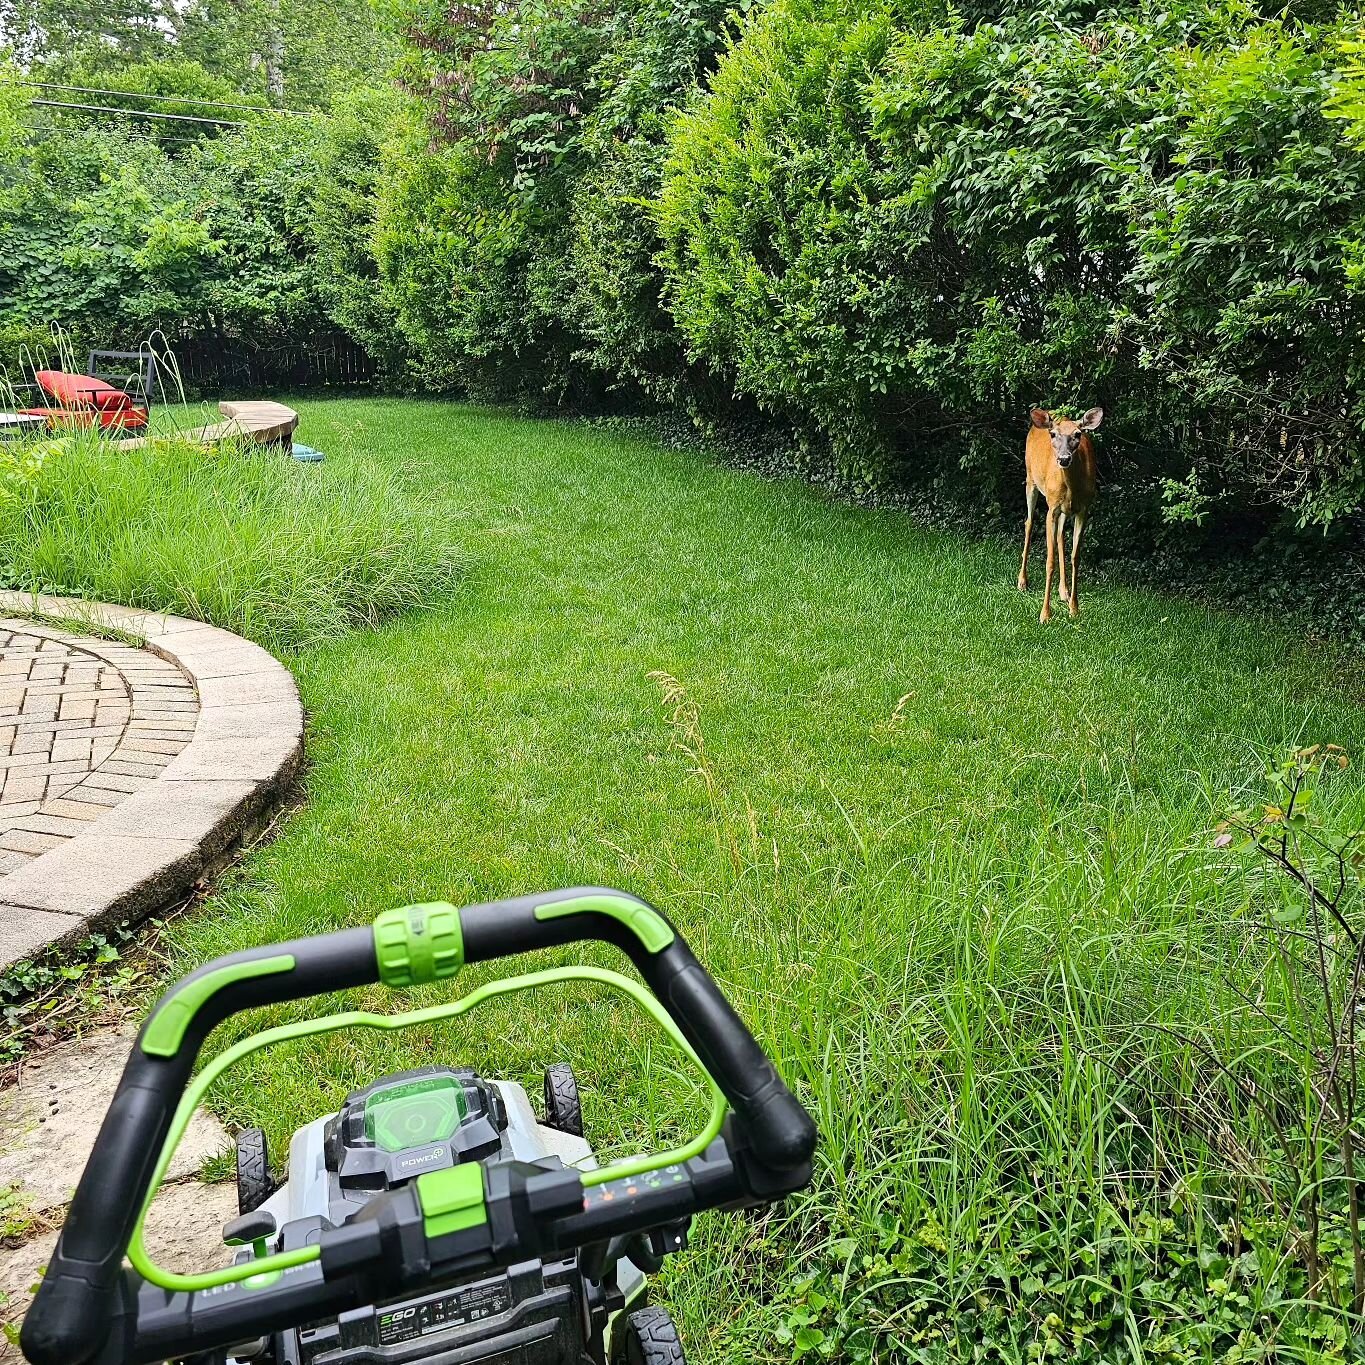 Even the wildlife doesn't mind our all electric mowing. That deer just stood there and watched us mow along. 🦌 🌱
#electriclawncare